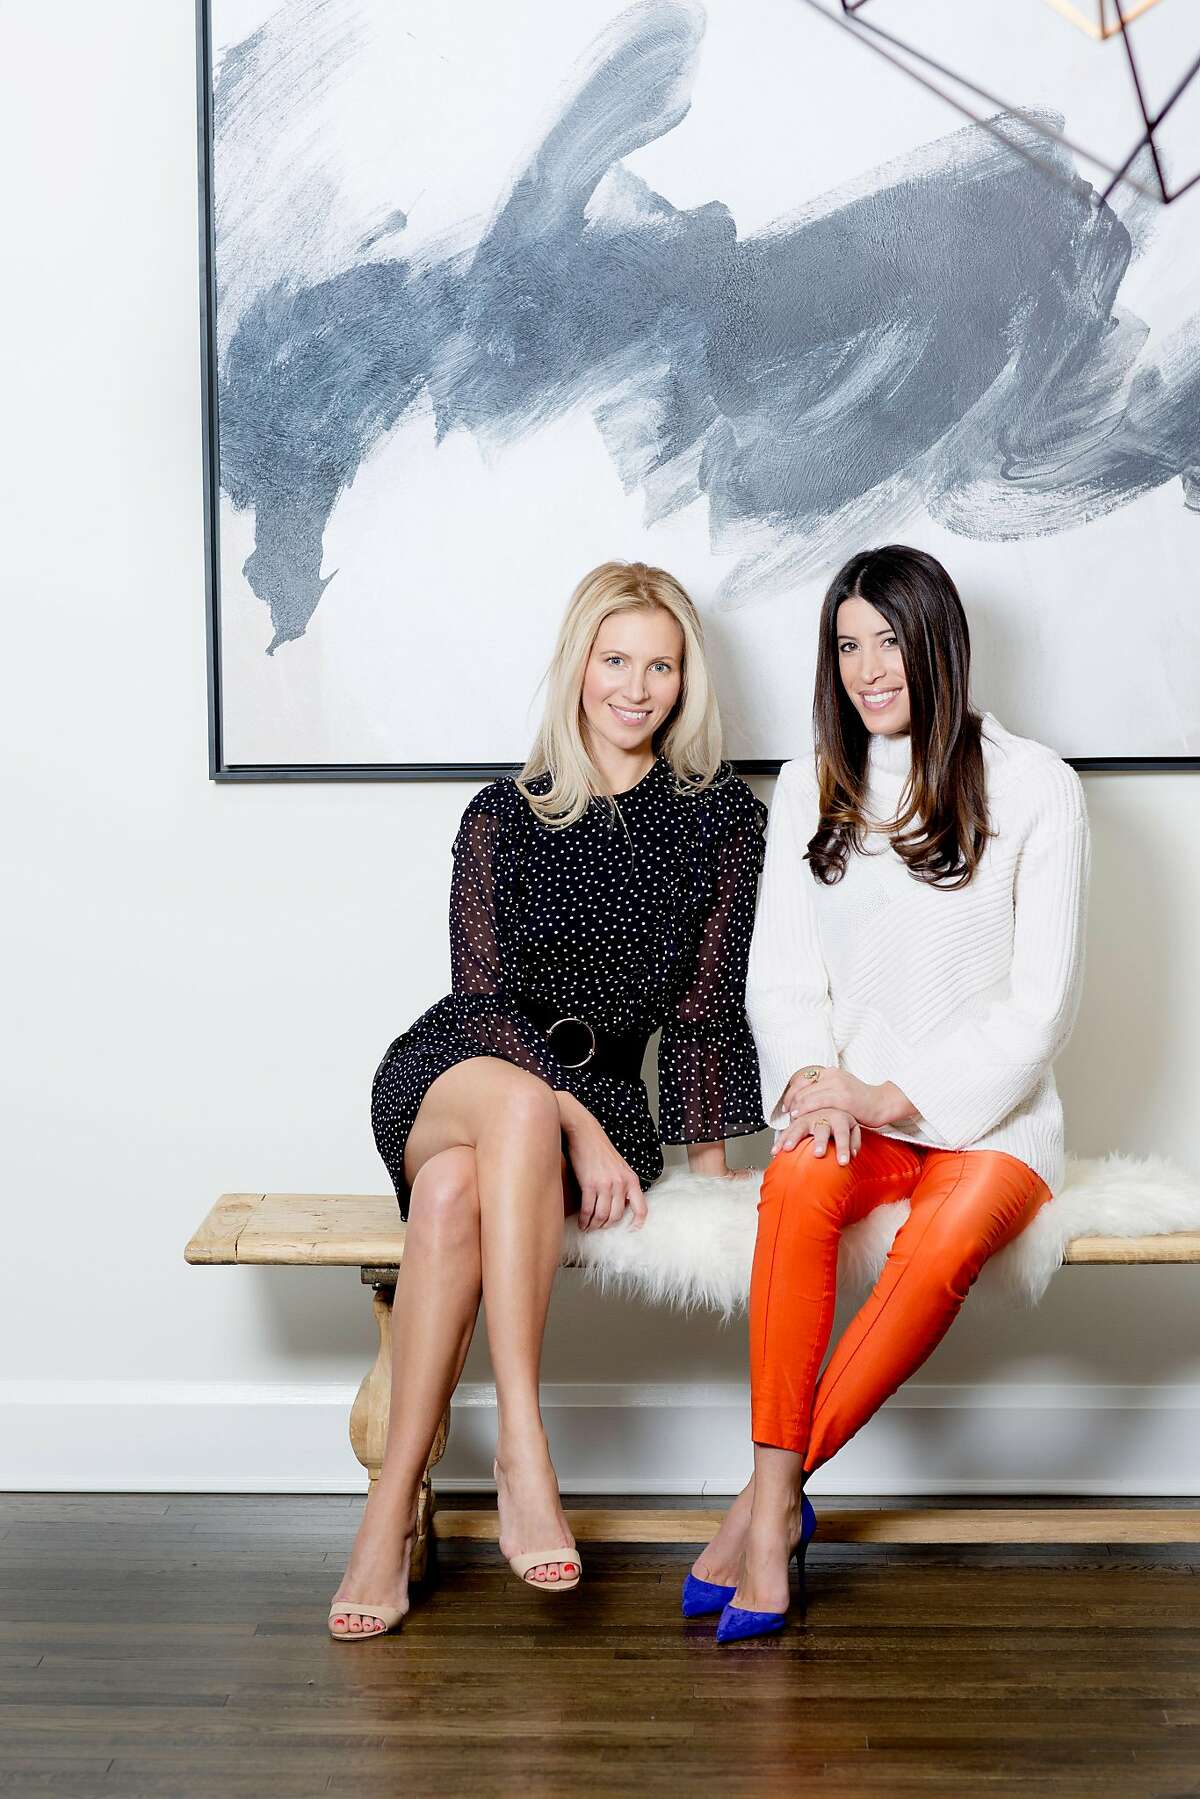 Nikki Lewis and Greta Tufvesson are the co-founders of the Bevy, an exclusive matchmaking service that started in New York in 2014 and recently expanded to San Francisco. (Lewis is brunette; Tufvesson is blond)